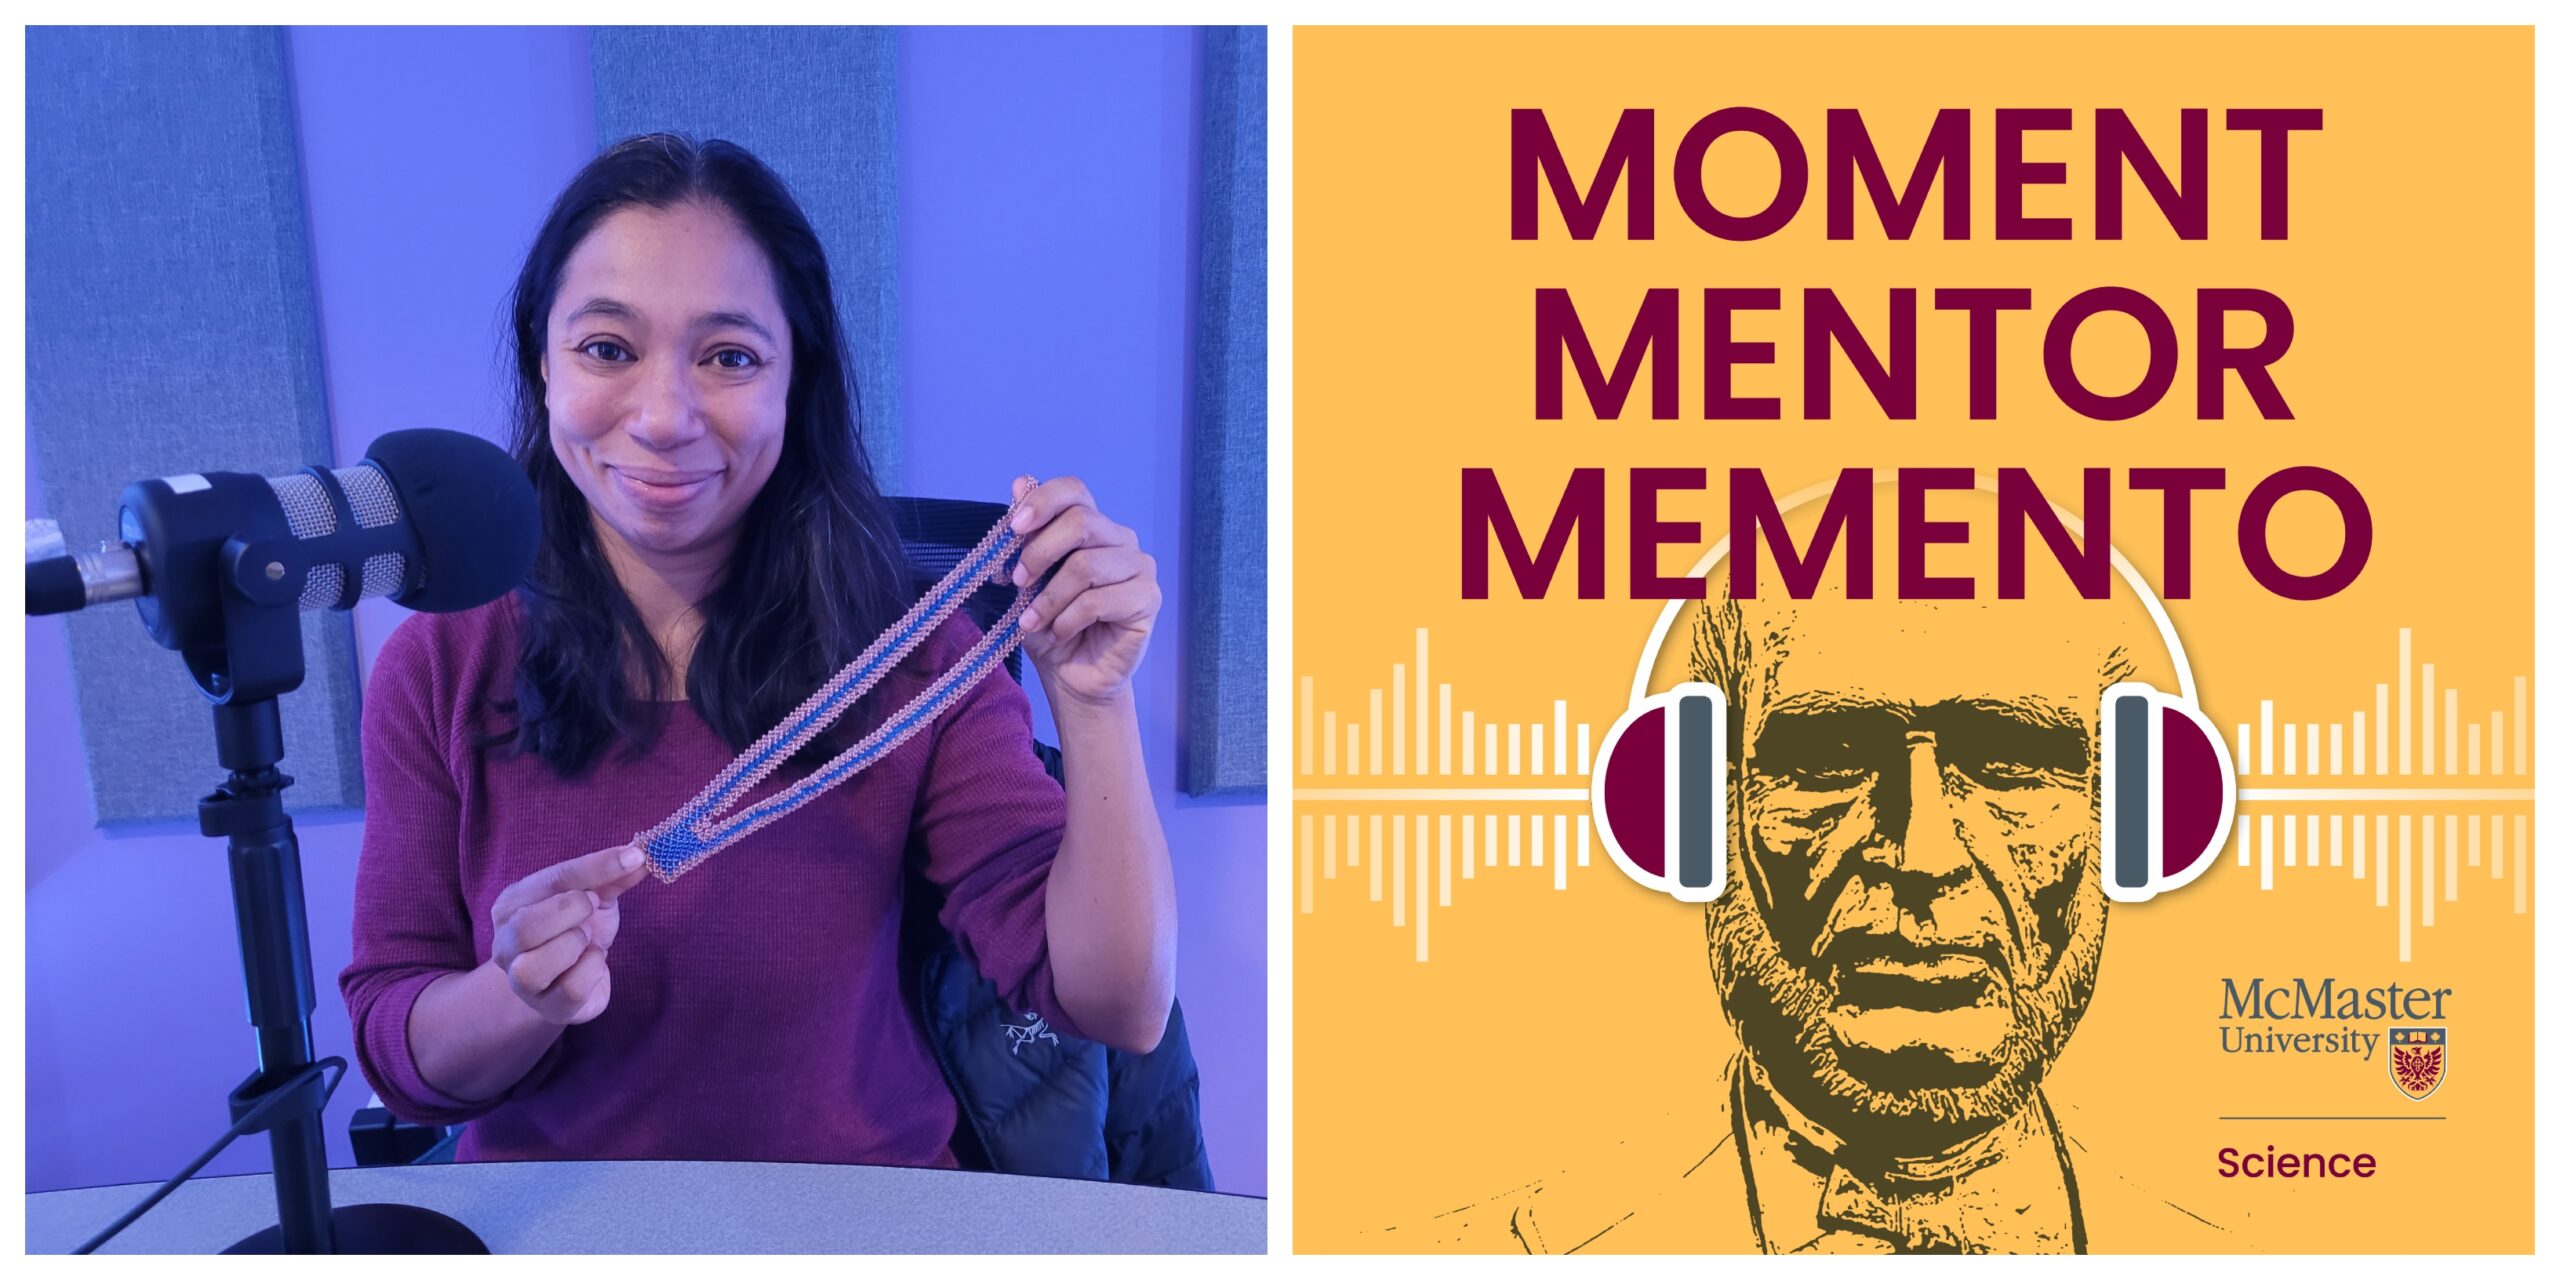 Emily Choy is the second guest on the Moment Mentor Memento podcast